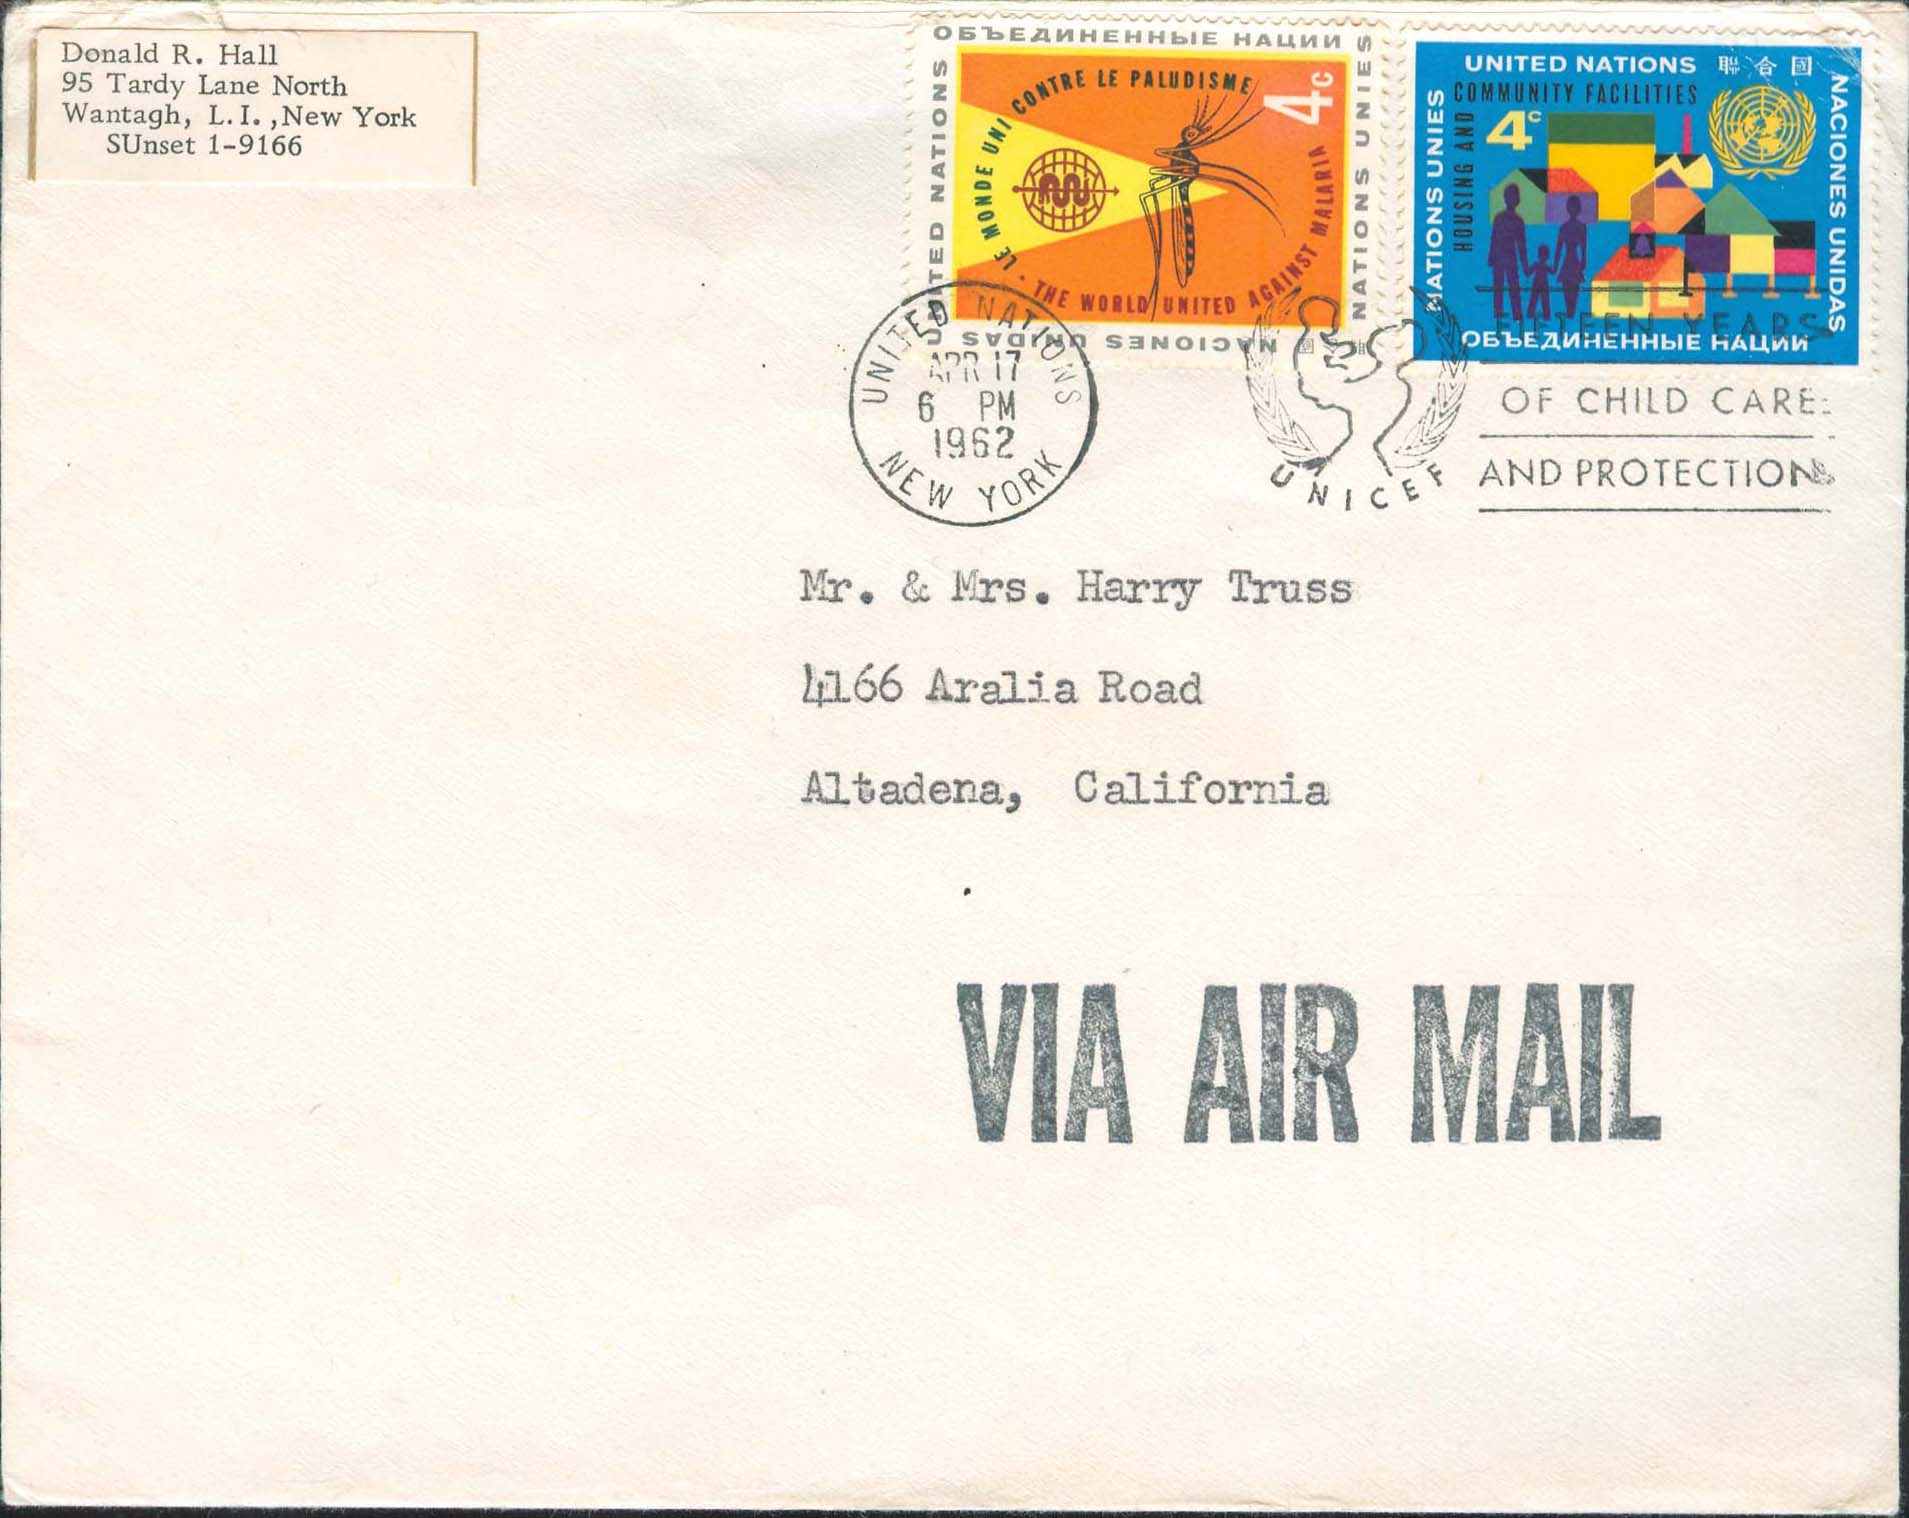 Airmail Rate: August 1, 1958 till January 6, 1963